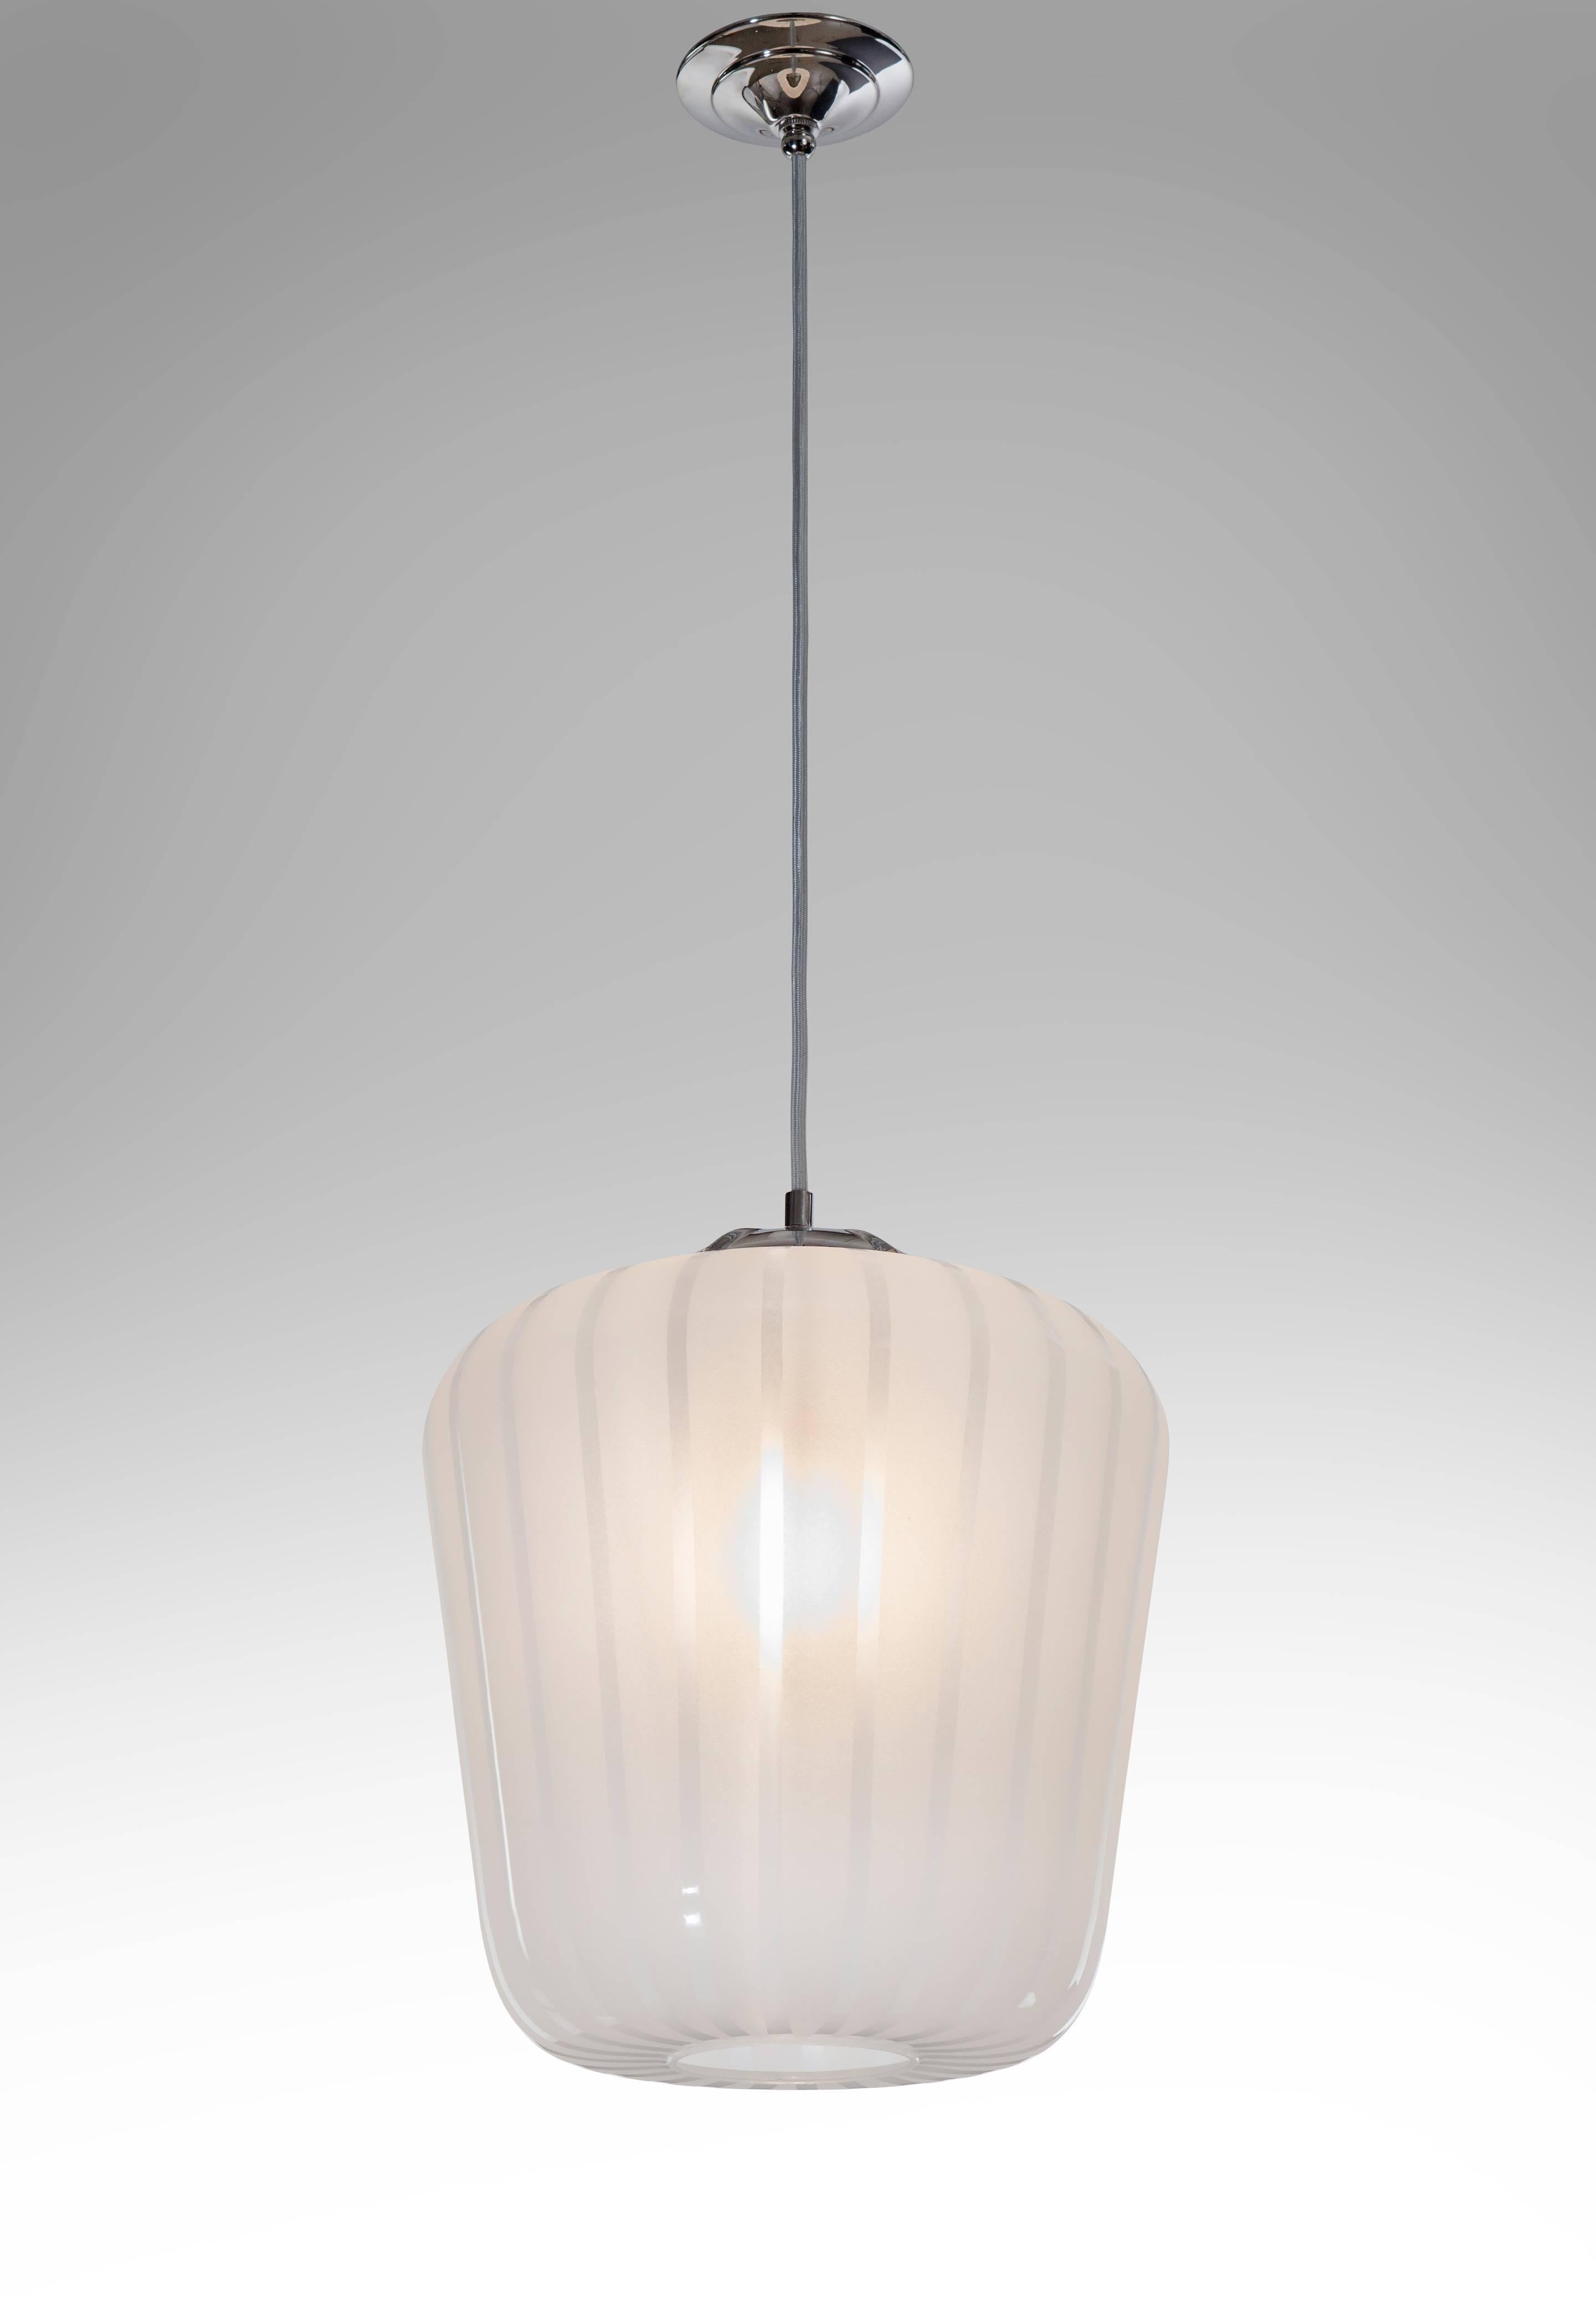 The striped frosted glass diffuser crowned by a metal disk and suspended by a cord, terminating in a circular opening. 
The height can easily be adjusted.
Overall height: 51"
Height of the body: 13"

Very good condition. Beautiful